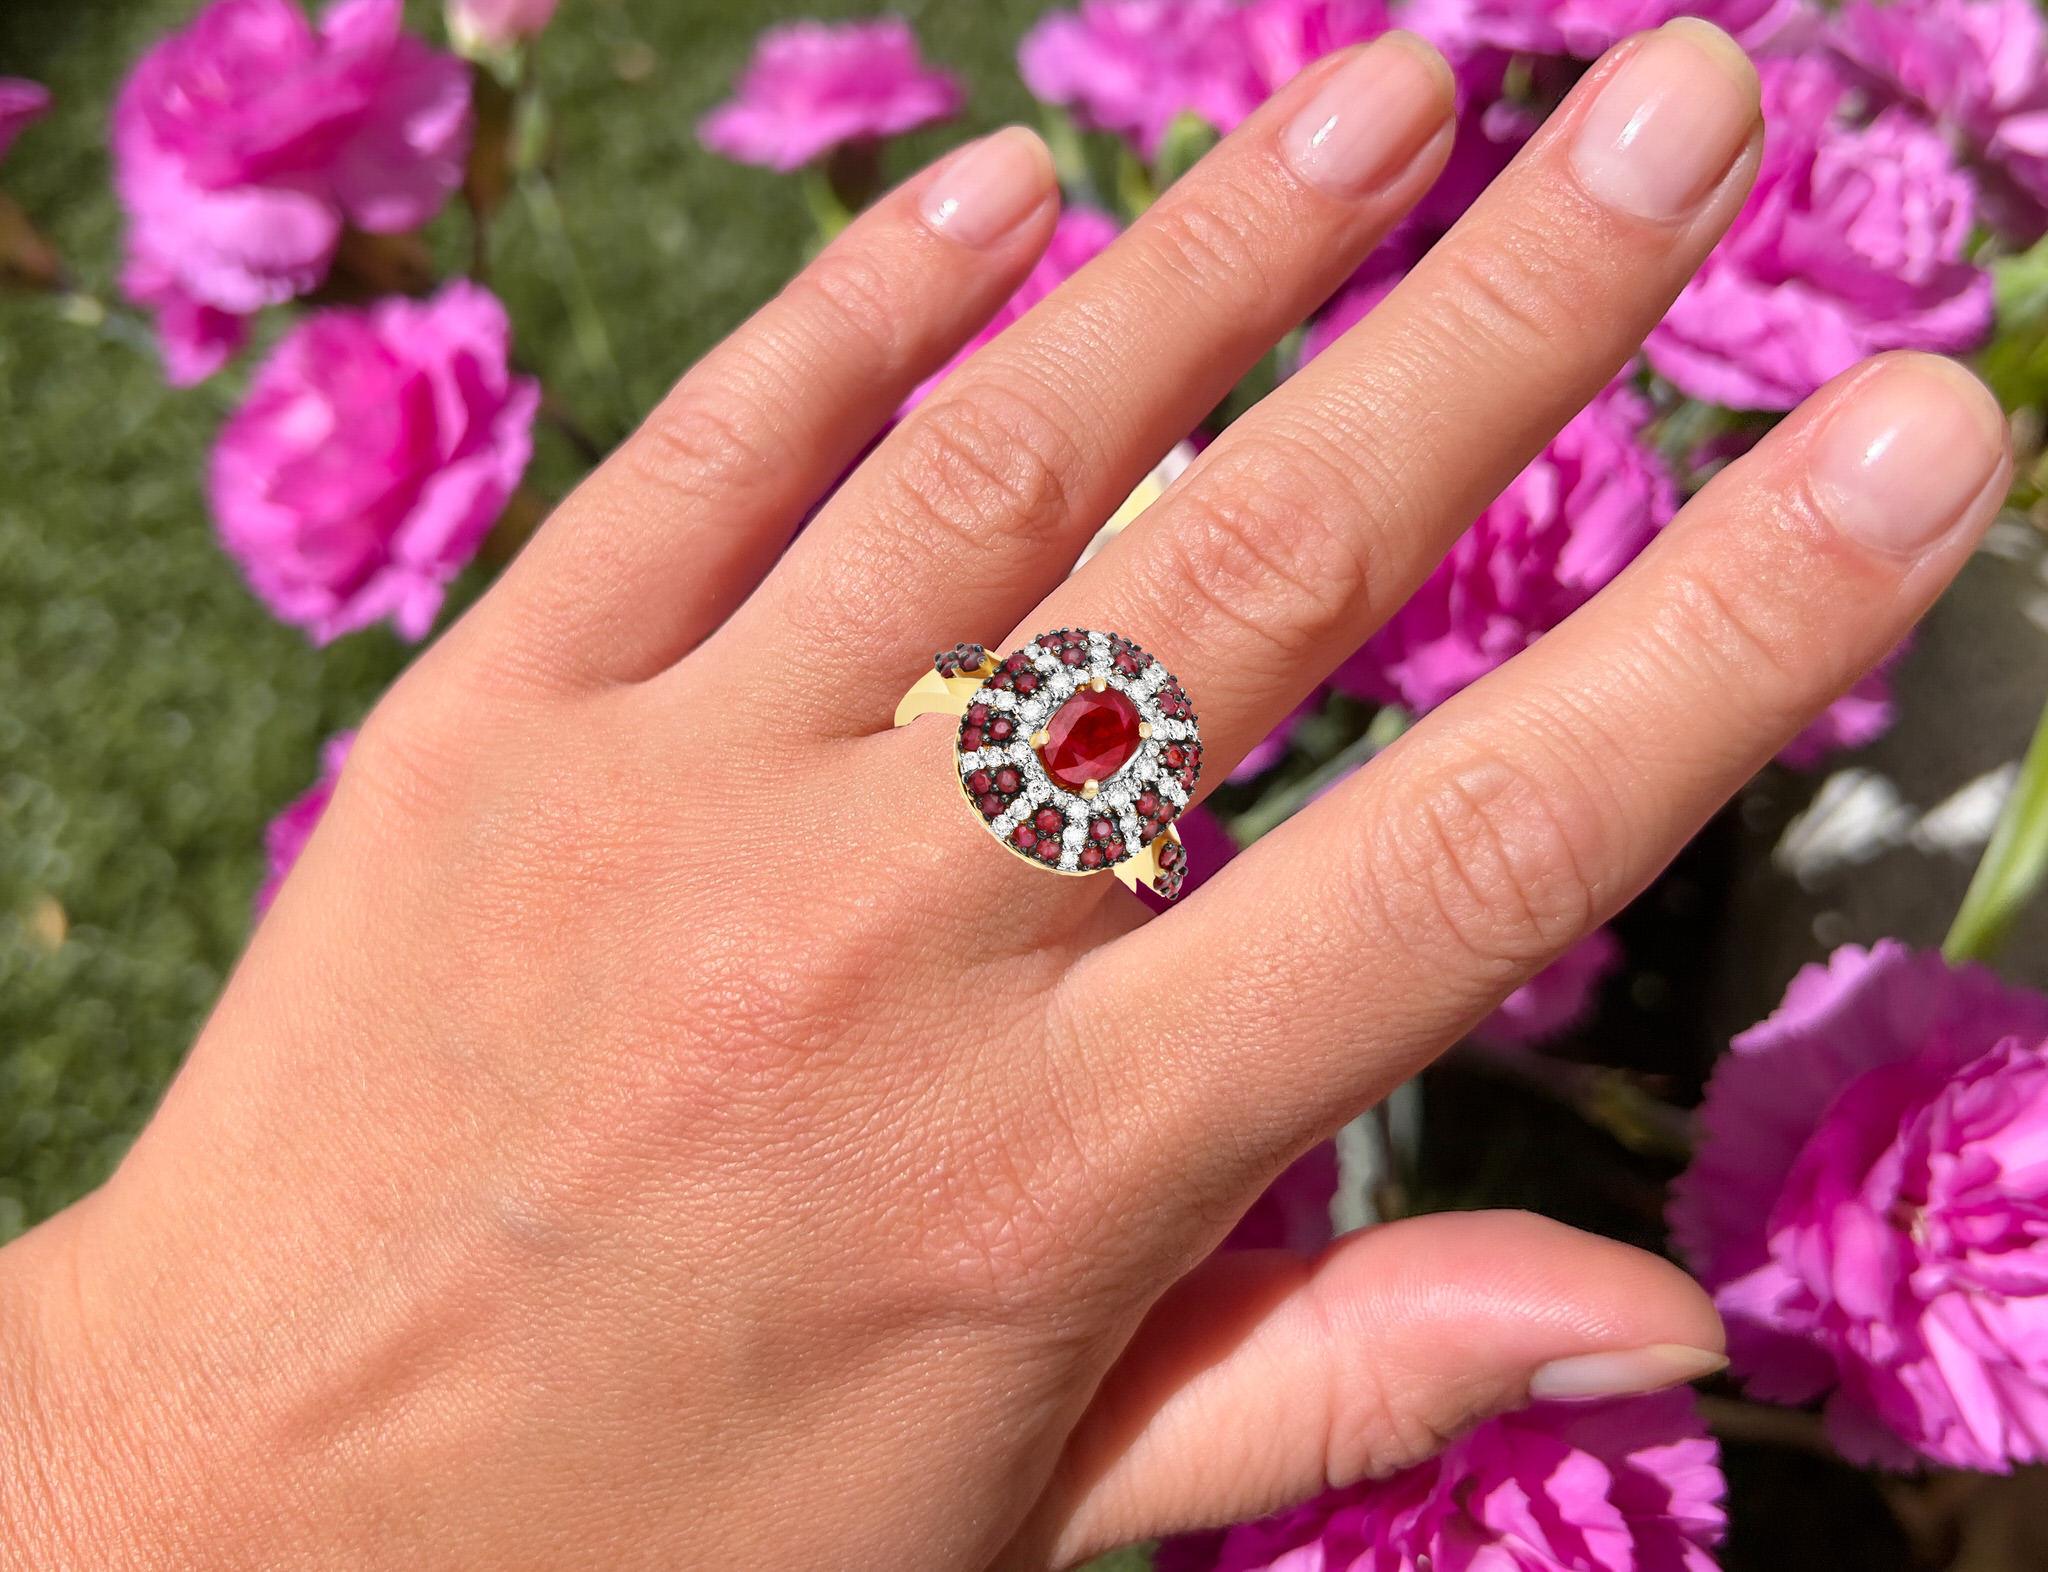 It comes with the appraisal by GIA GG/AJP
All Gemstones are Natural  
1 Oval Ruby = 0.85 Carat
38 Round Rubies = 0.72 Carats
40 Diamonds = 0.35 Carats
Metal: 14K Yellow Gold 
Ring Size: 7* US
*It can be resized complimentary